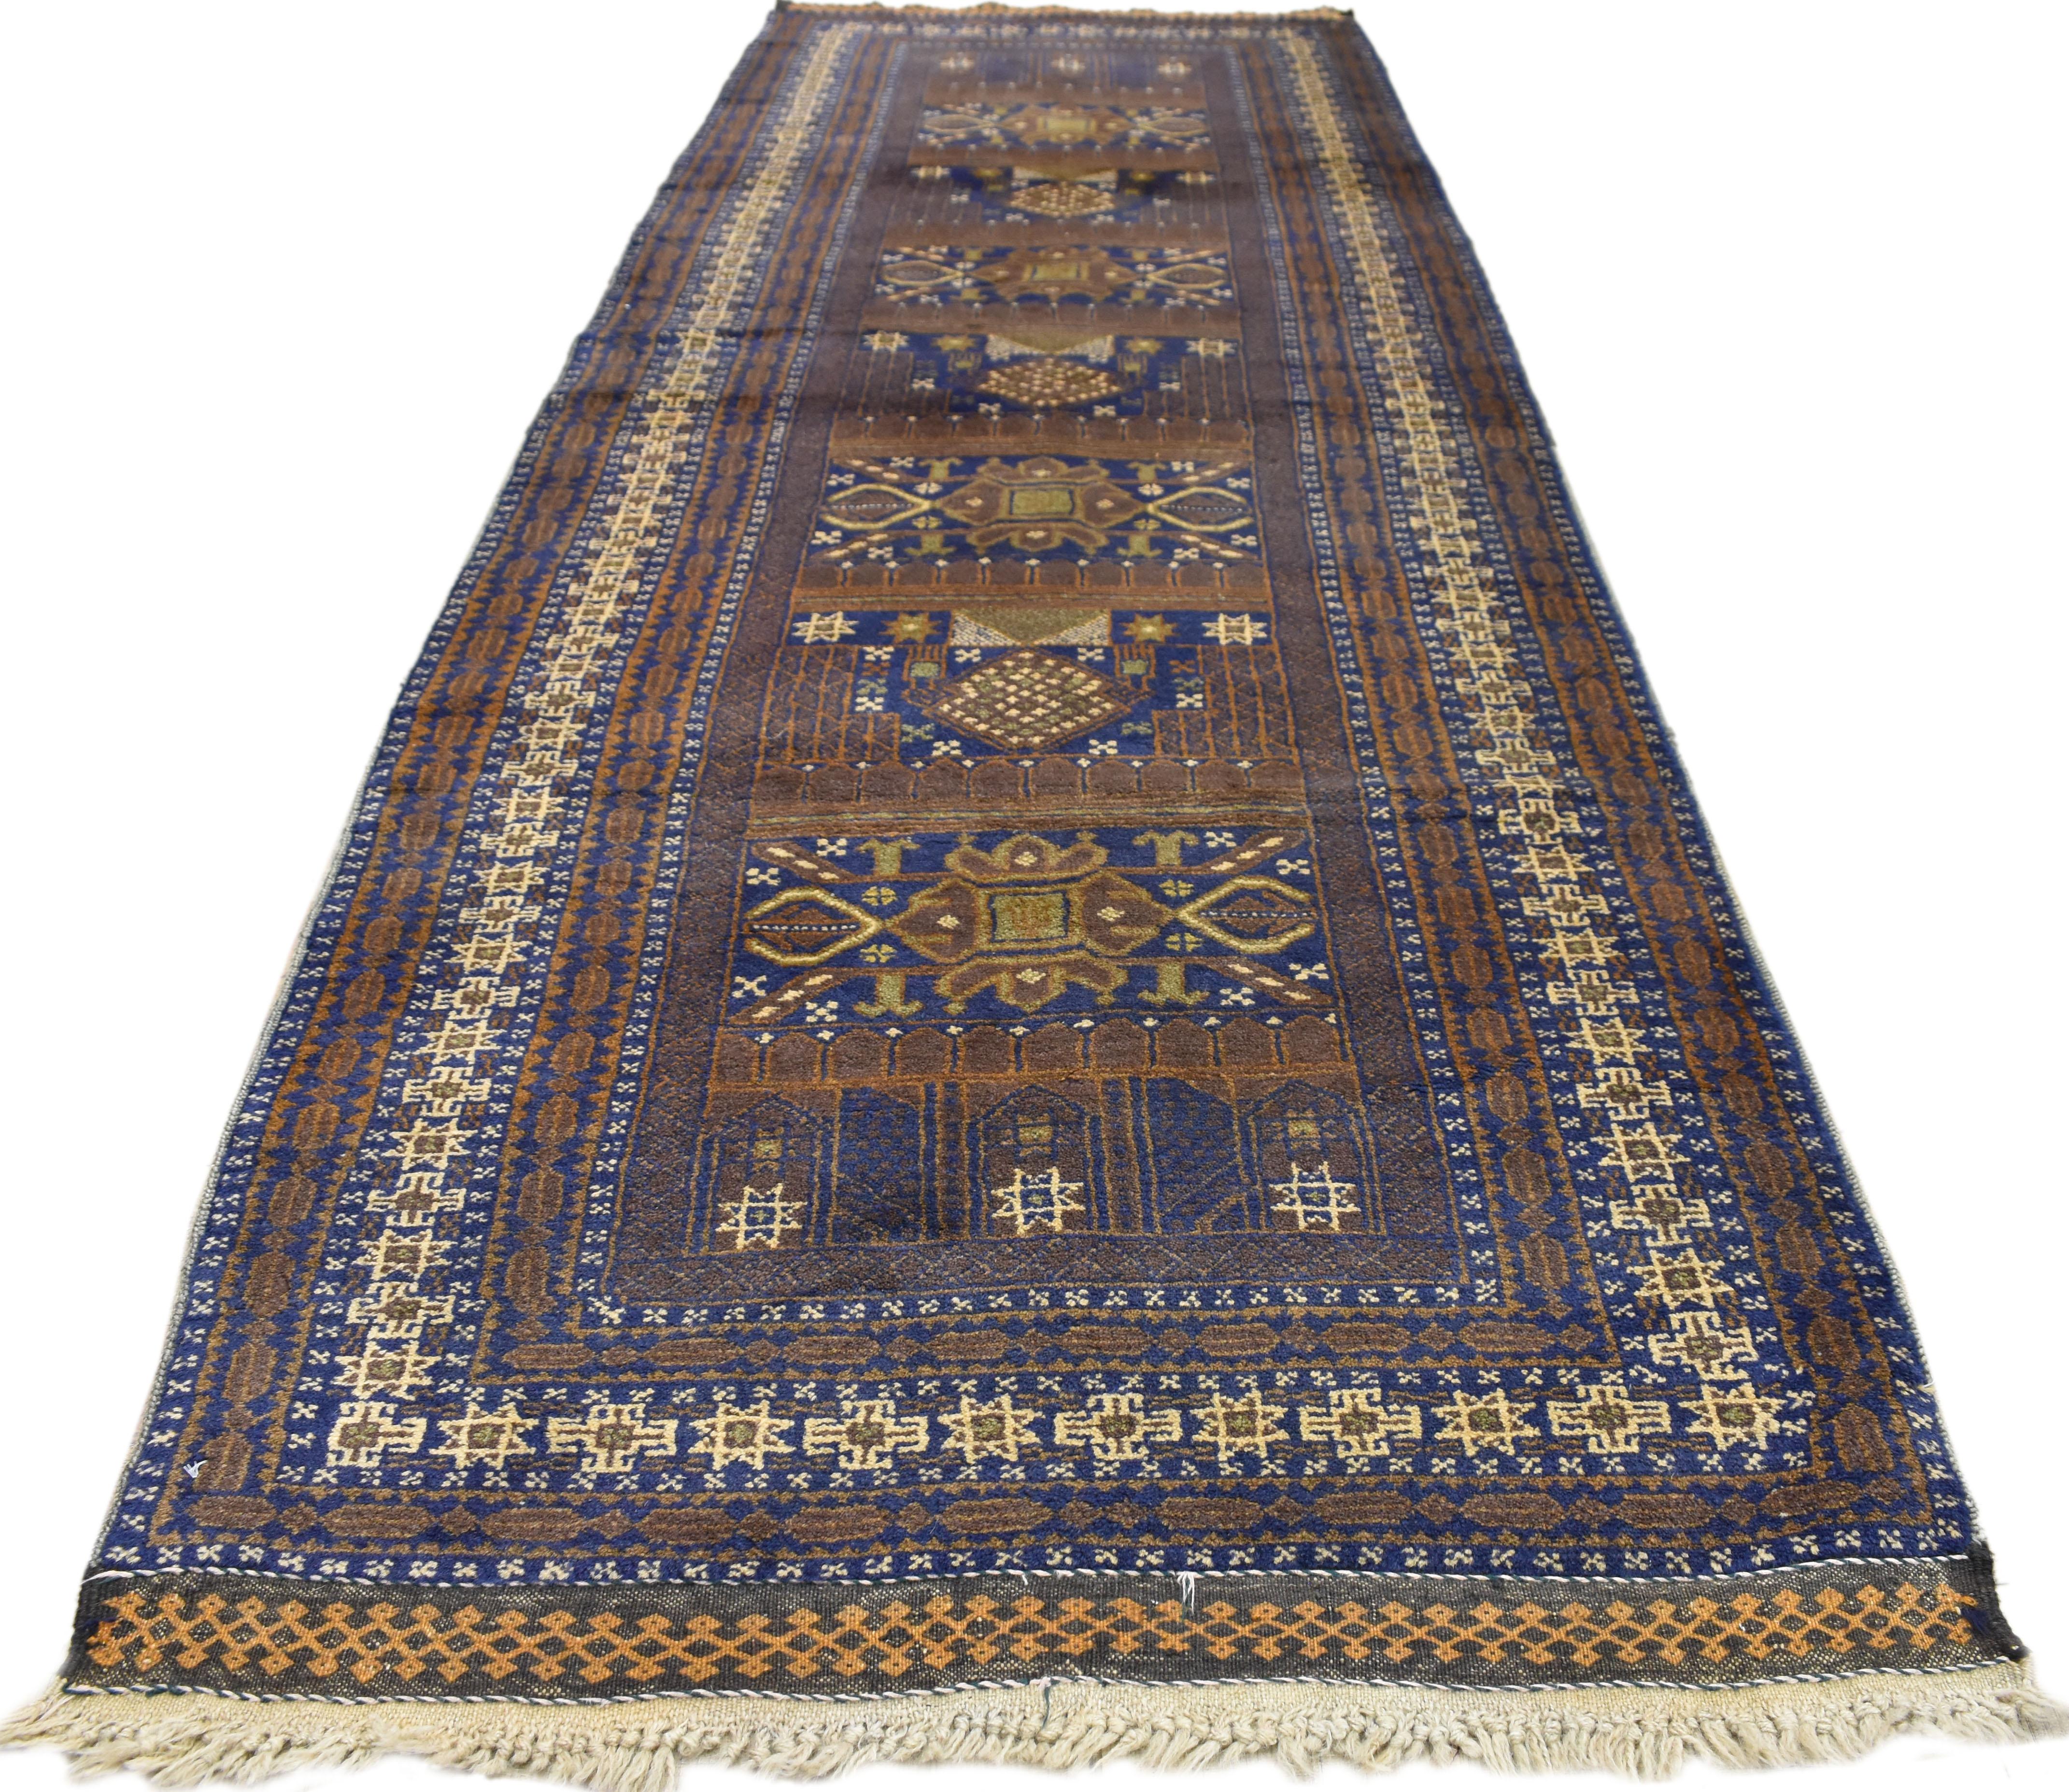 Hand-Knotted Vintage Afghan Balouchi War Hallway Runner with Tribal Nomadic Style